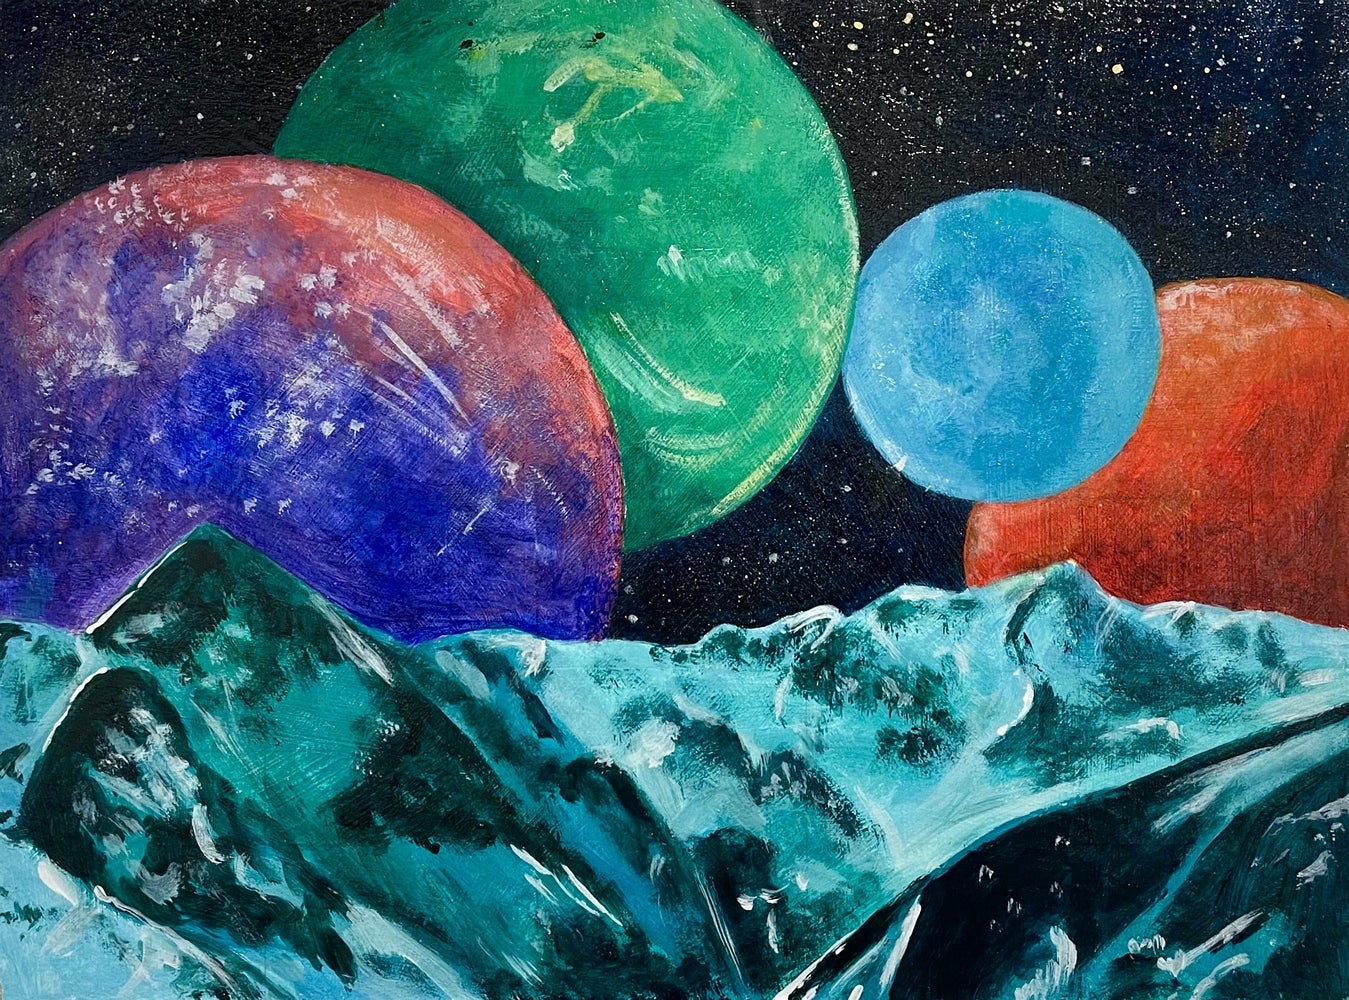 Painting of a cosmic landscape with icy blue mountains in front of four planets coloured green, orange, red and purple